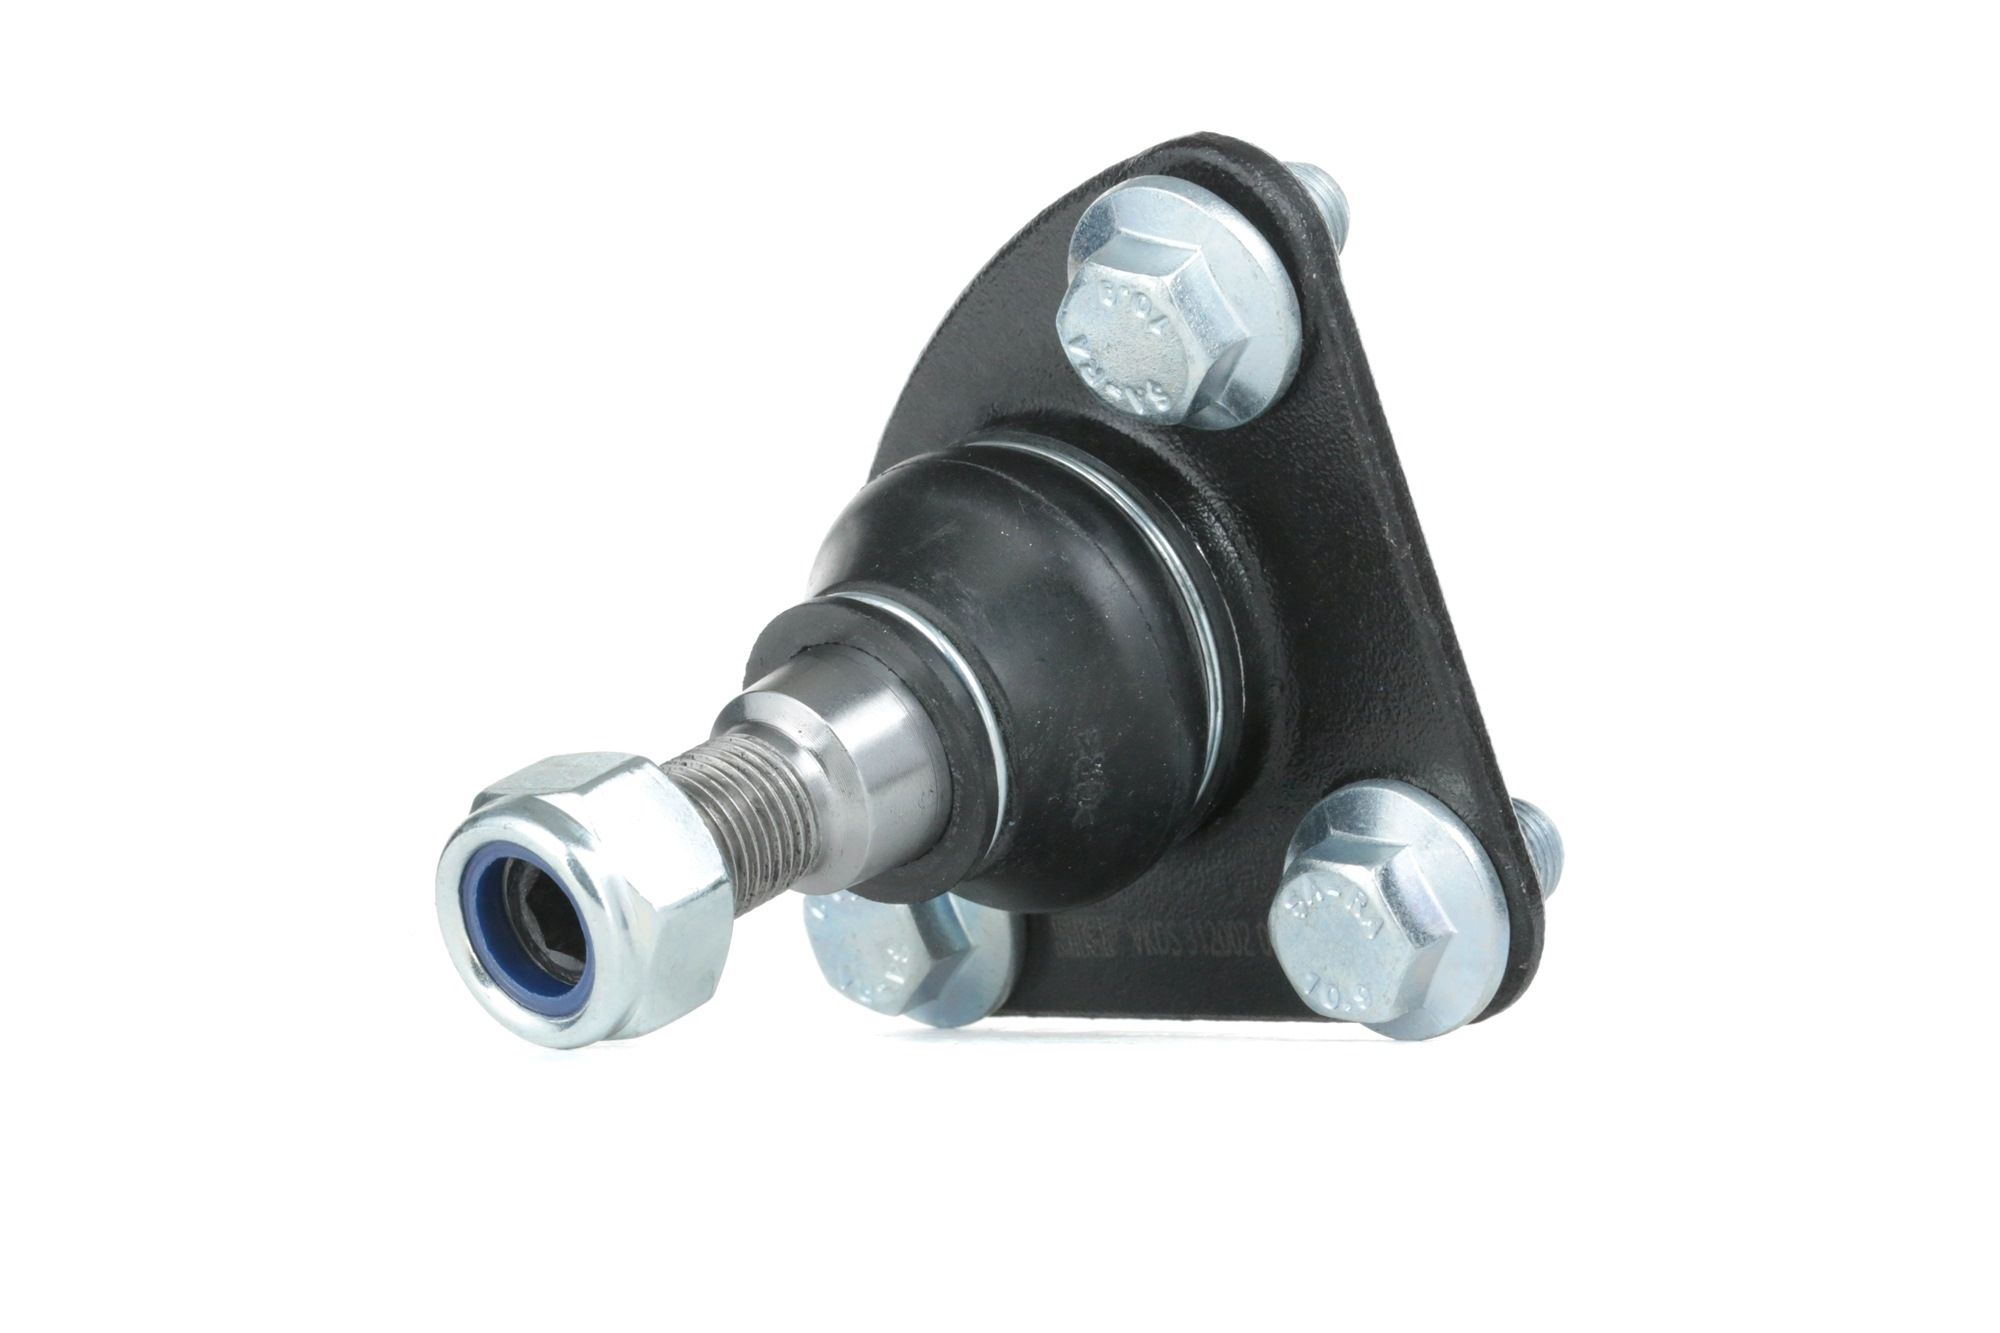 Citroën Ball Joint SKF VKDS 312002 at a good price